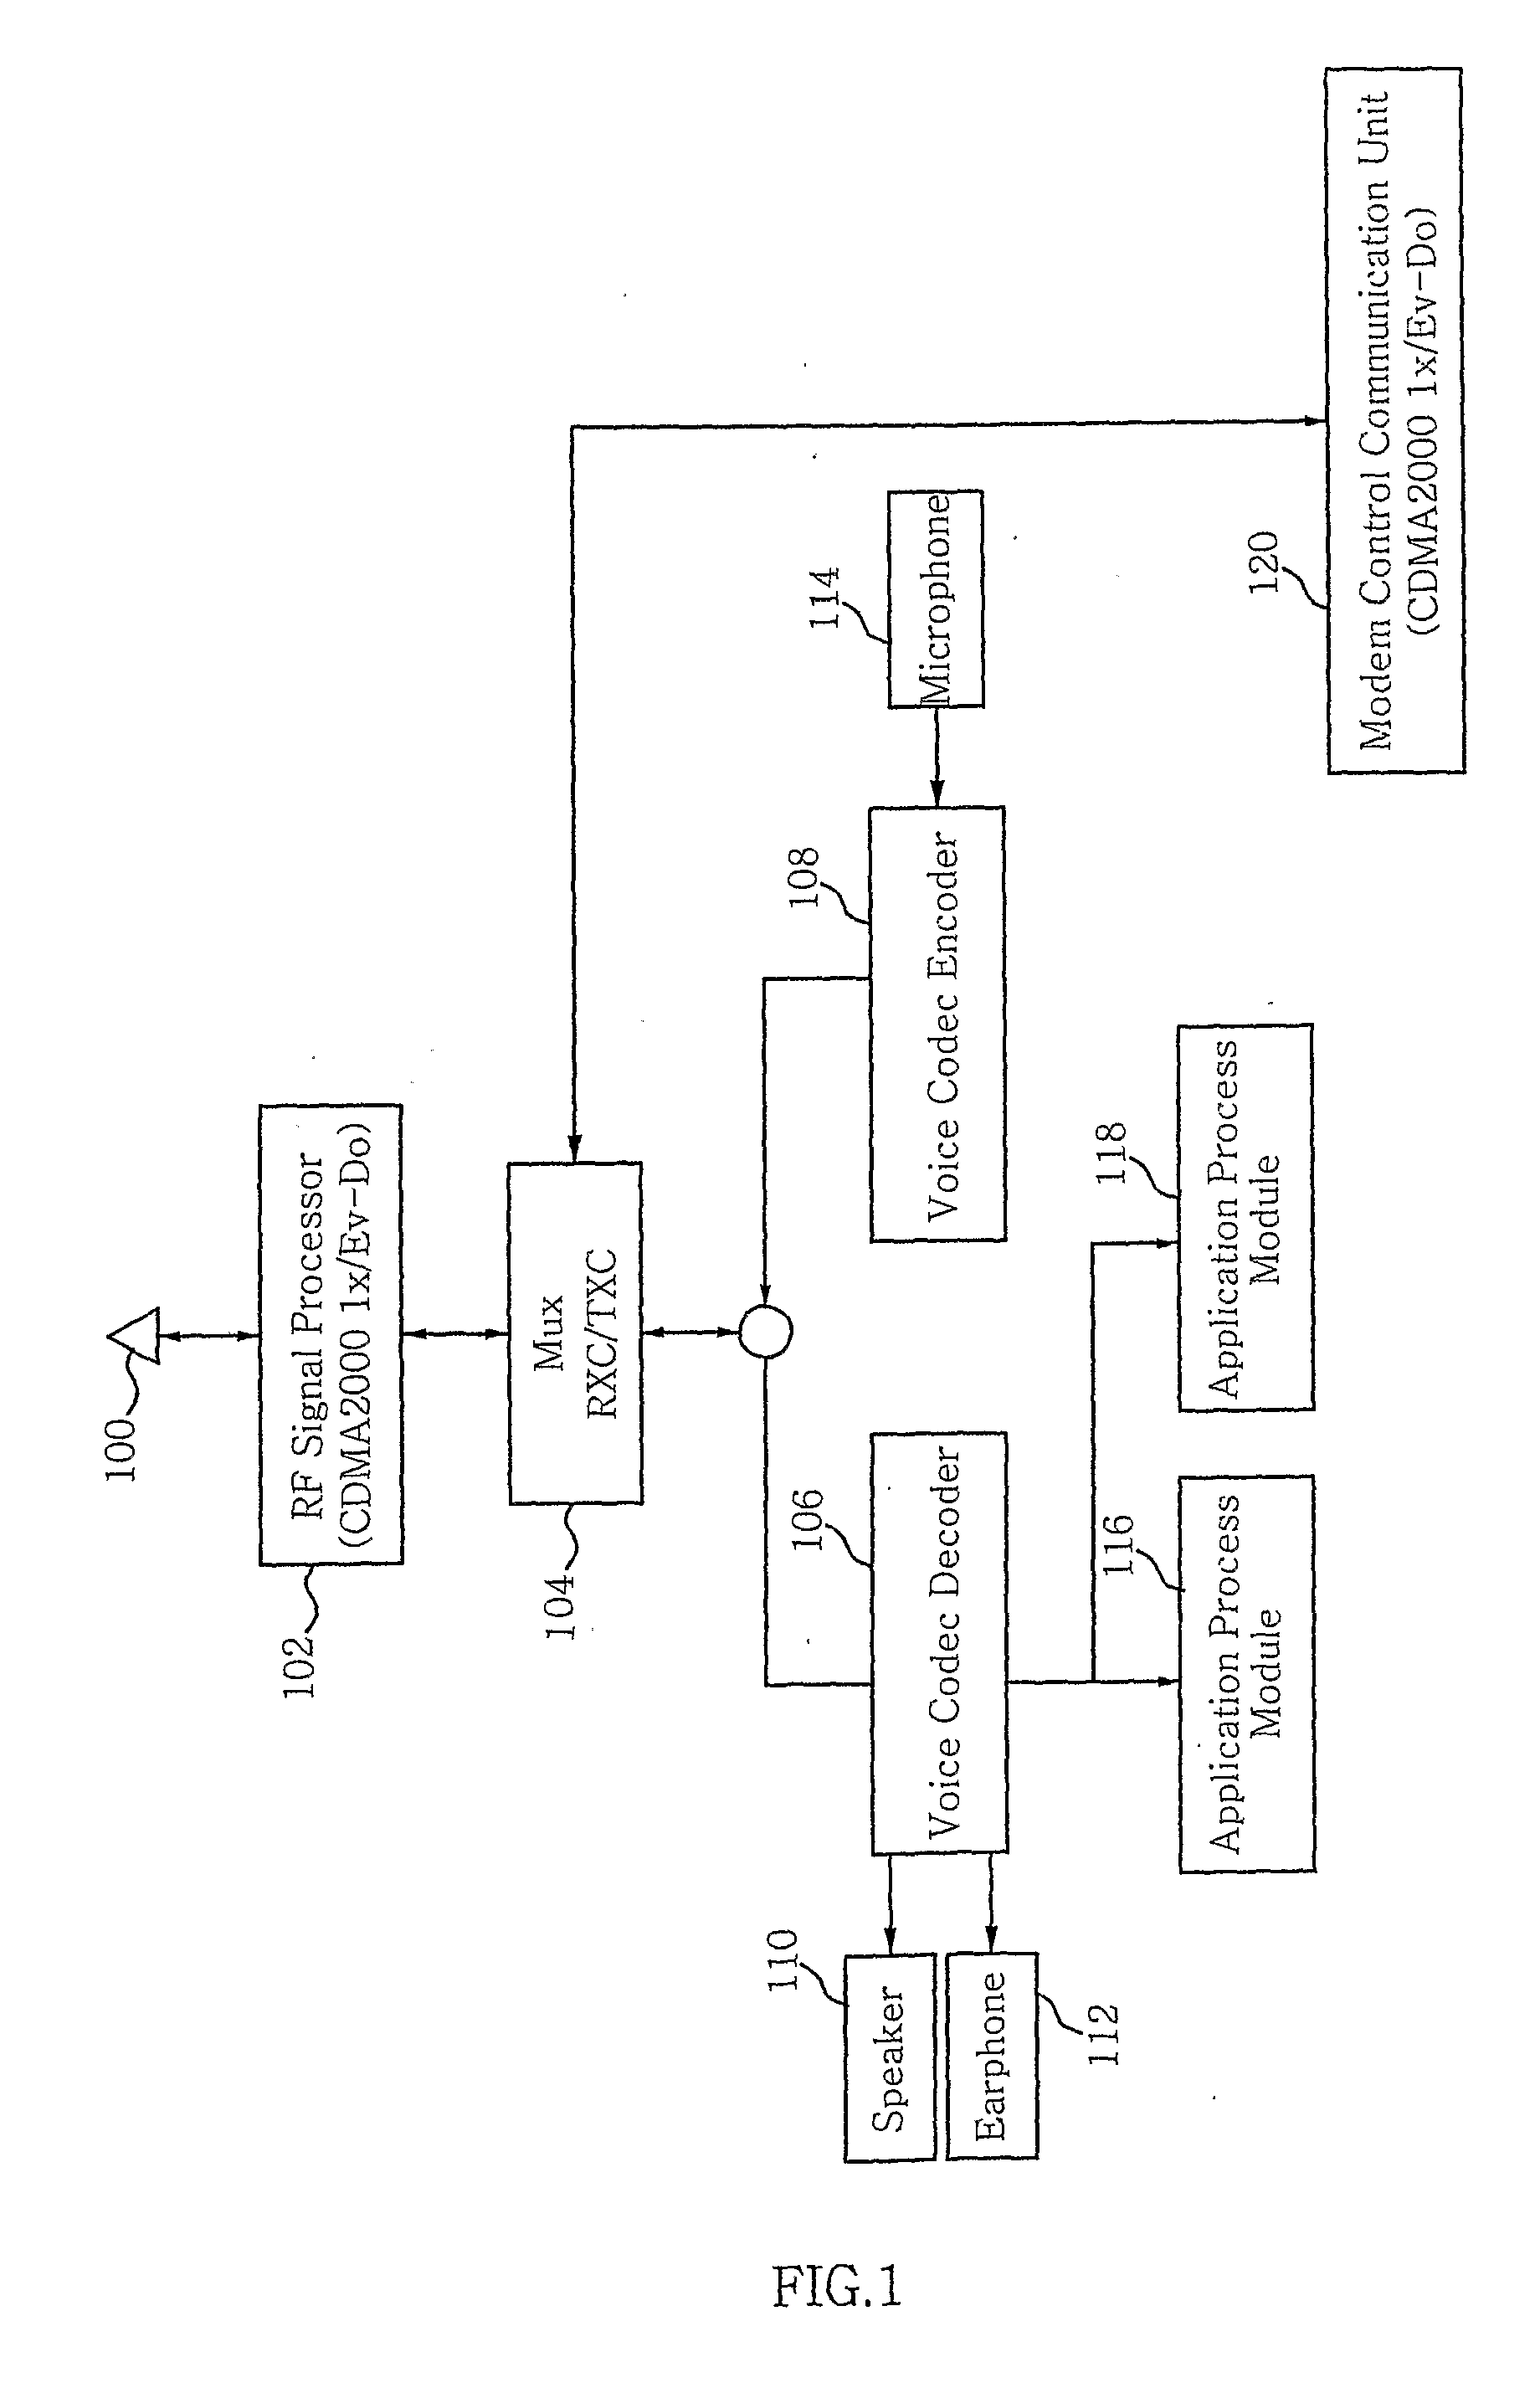 Terminal for Multimedia Ring Back Tone Service and Metnod for Controlling Terminal